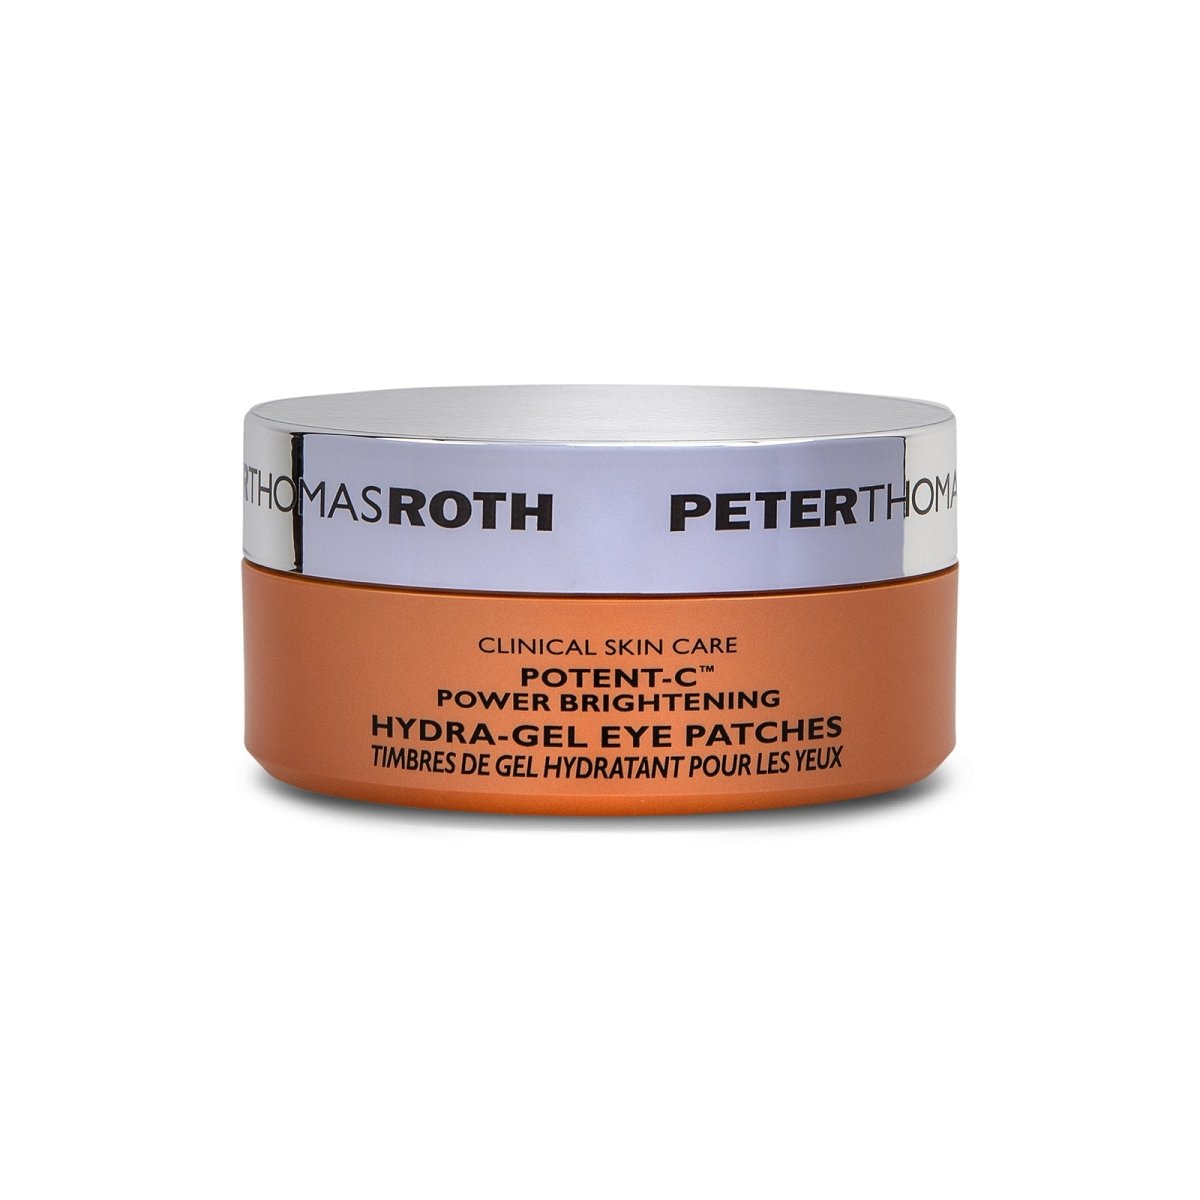 Peter Thomas Roth Potent-C? Hydra-Gel Eye Patches